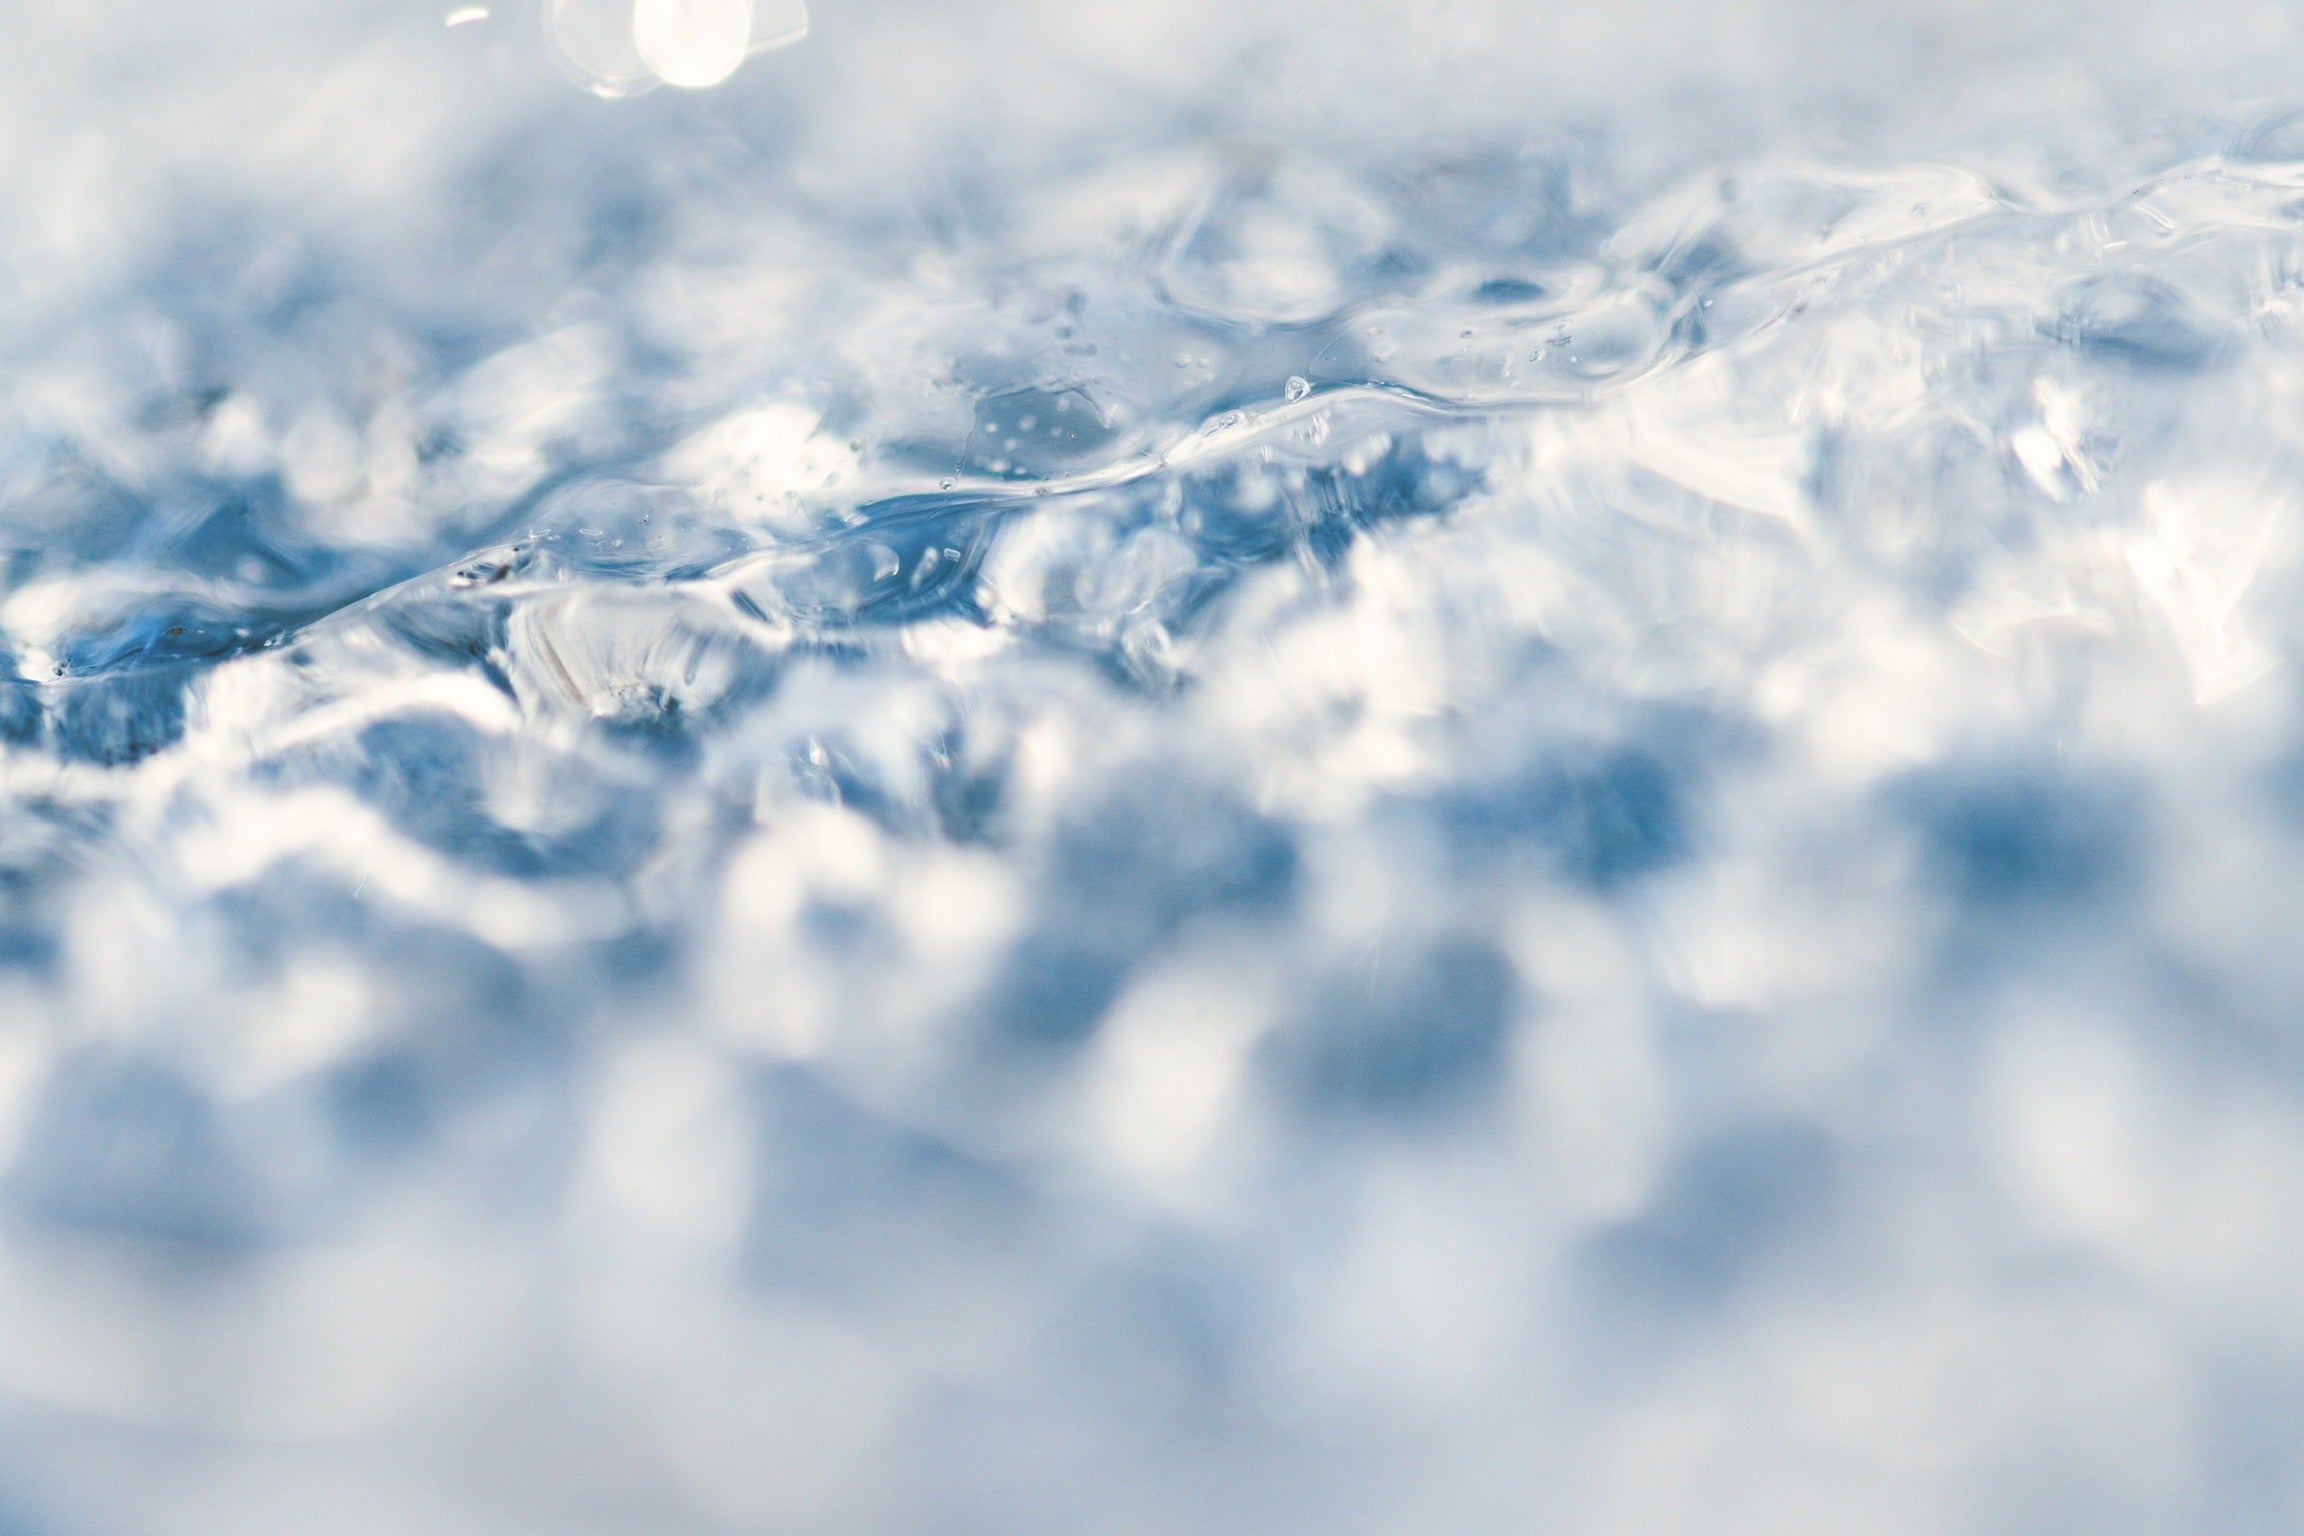 a closeup image of an icy surface with a gentle gradient of blue hues